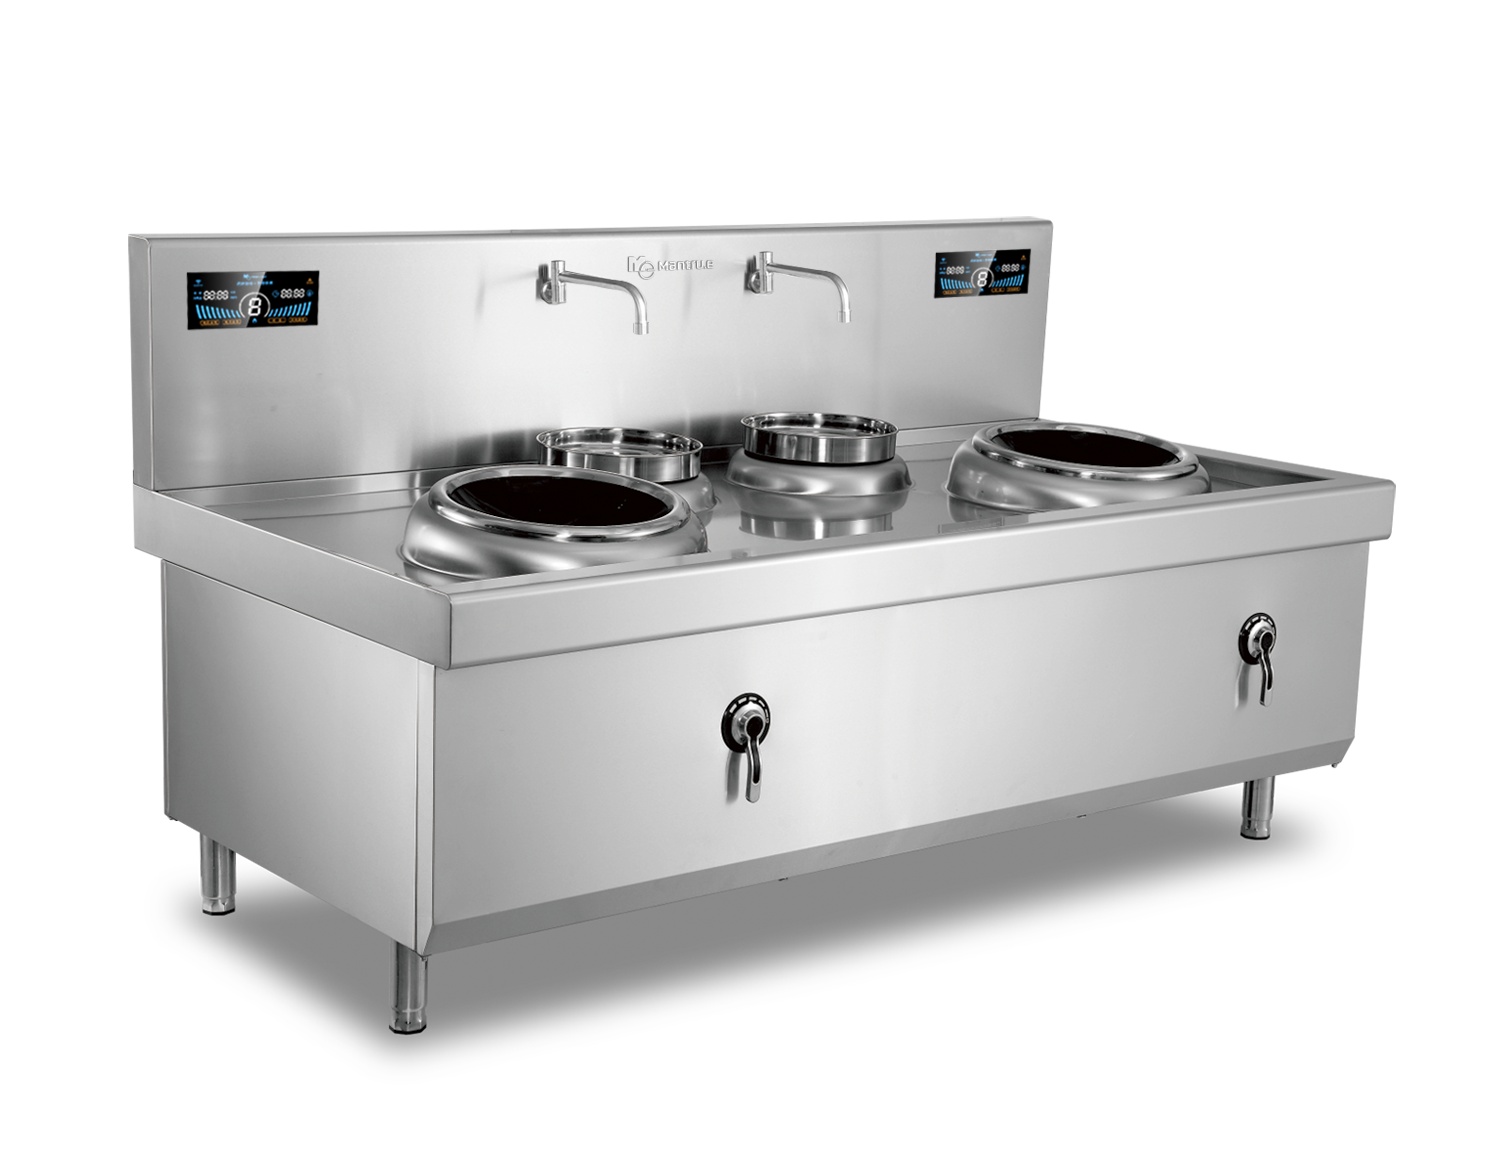 400mm Double Burner with double basin Induction Wok